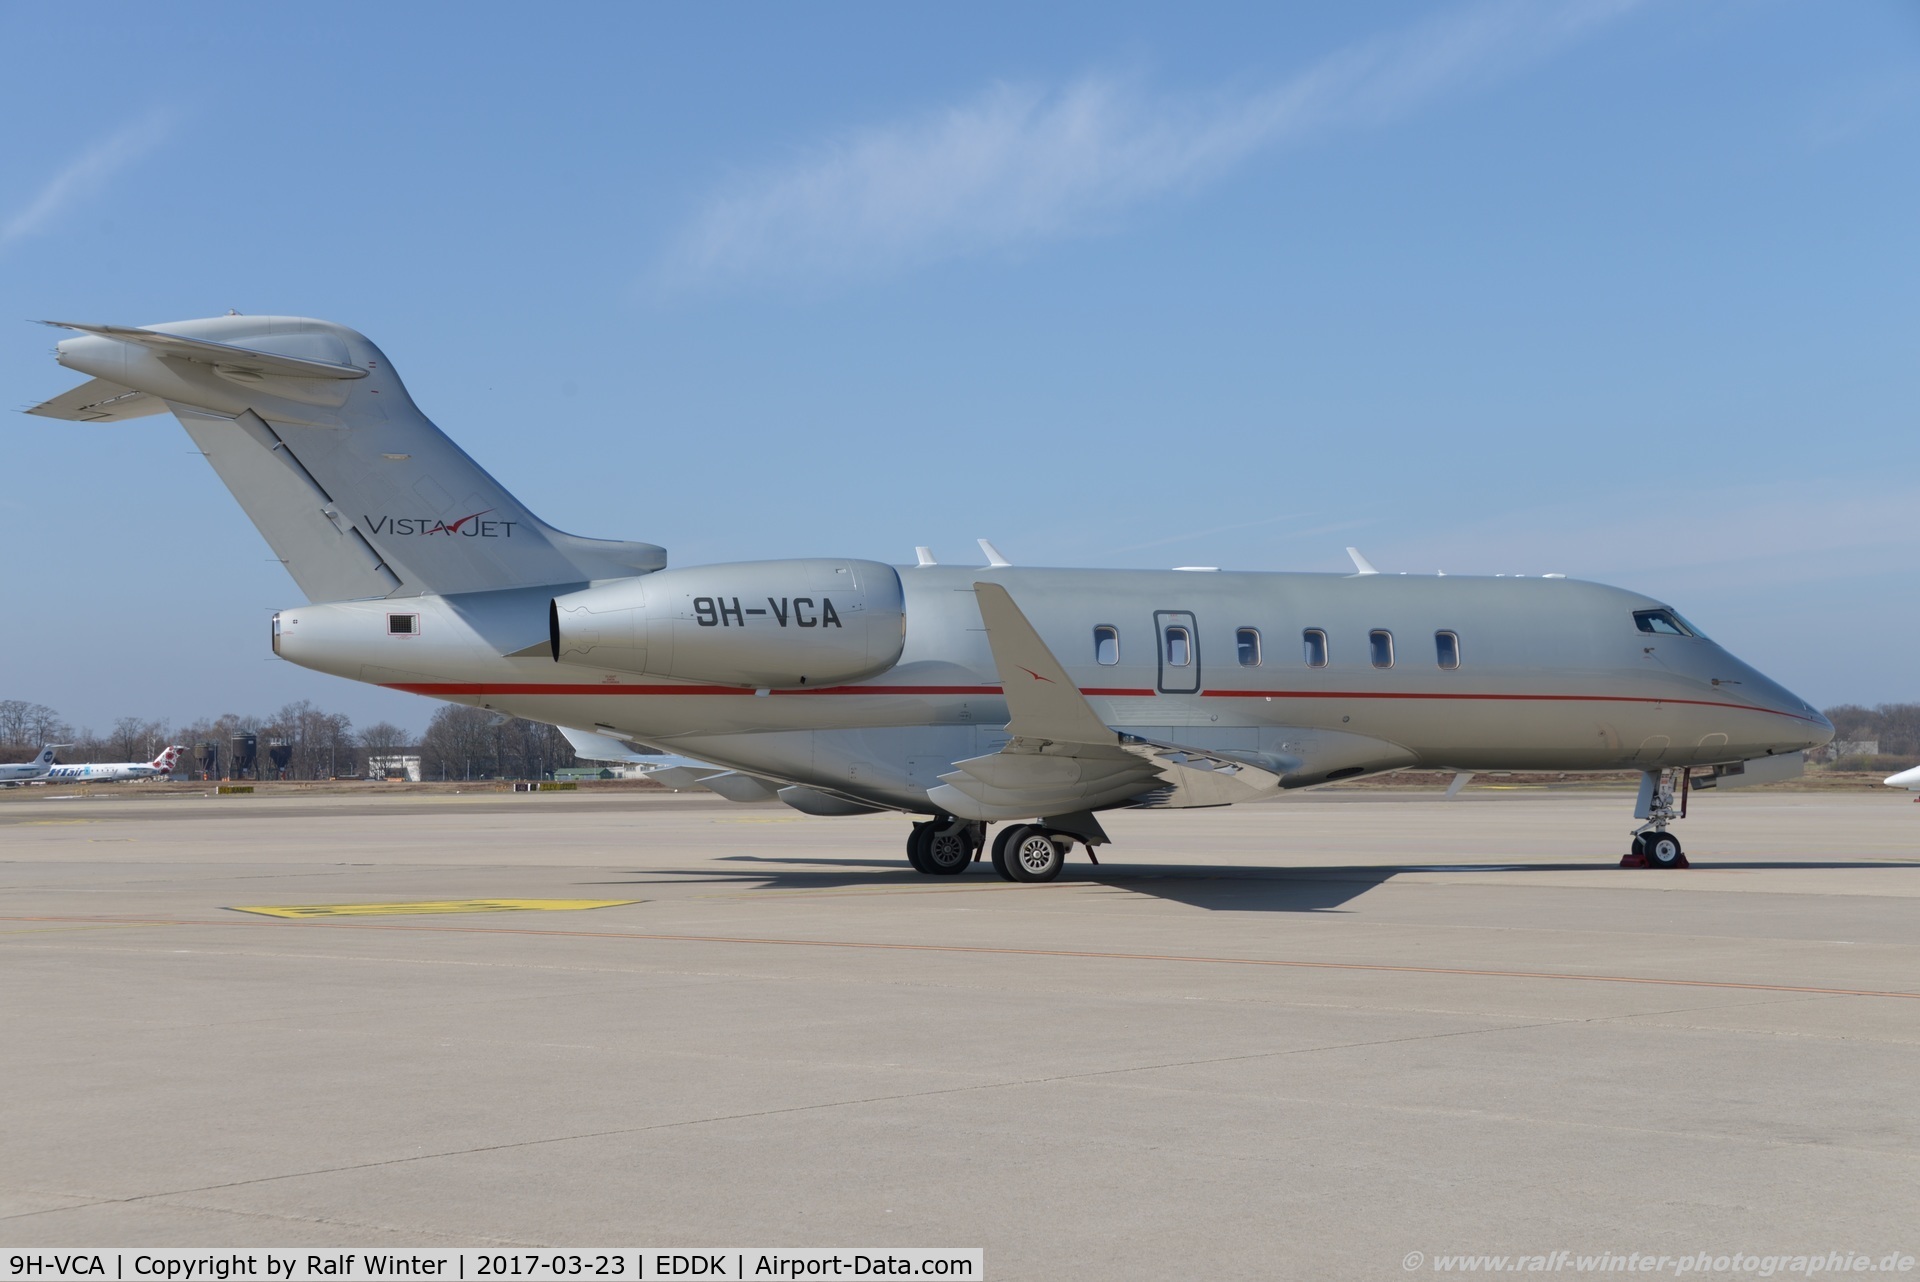 9H-VCA, 2014 Bombardier Challenger 350 (BD-100-1A10) C/N 20513, Bombardier BD-100-1A10 Challenger 350 - VJT VistaJet Ltd - 20513 - 9H-VCA - 23.03.2017 - CGN